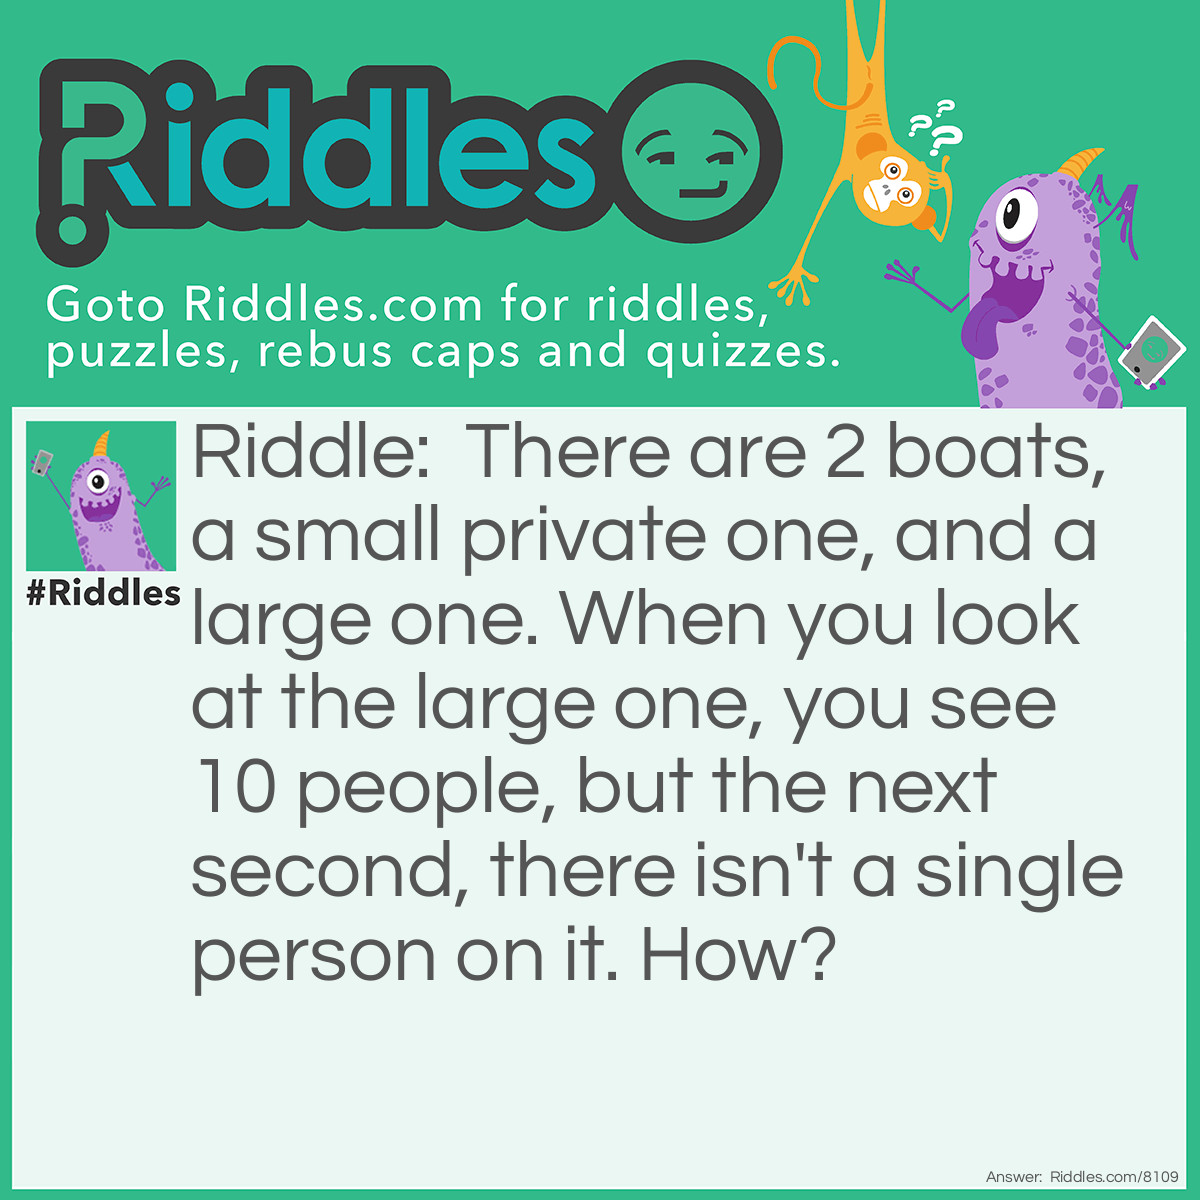 Riddle: There are 2 boats, a small private one, and a large one. When you look at the large one, you see 10 people, but the next second, there isn't a single person on it. How? Answer: Everyone was a Couple (they're married).